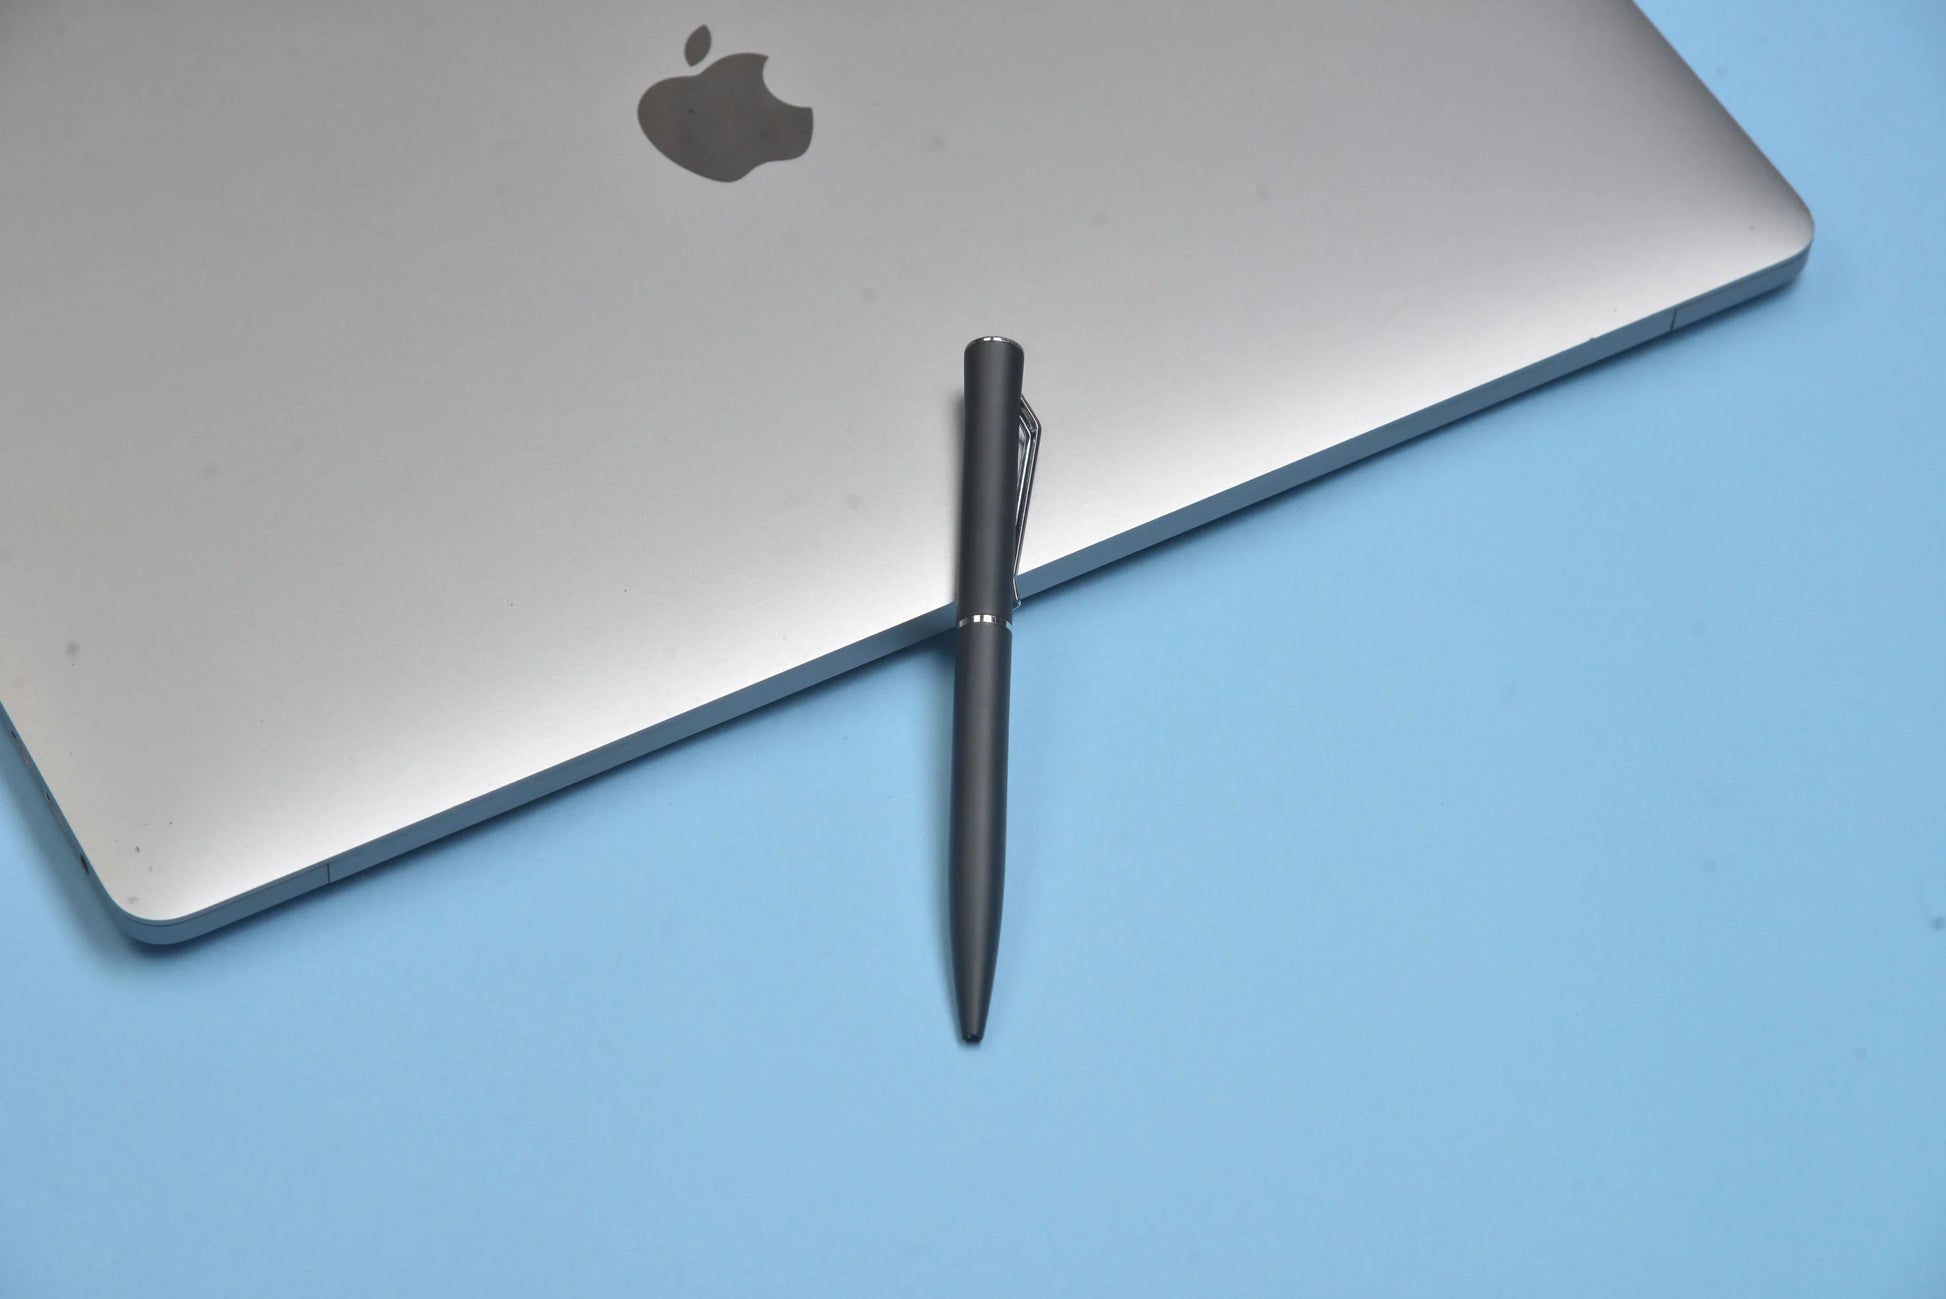 Make your writing experience unforgettable with our personalized Classy metal classic pen, designed to add a touch of sophistication to your everyday writing needs.